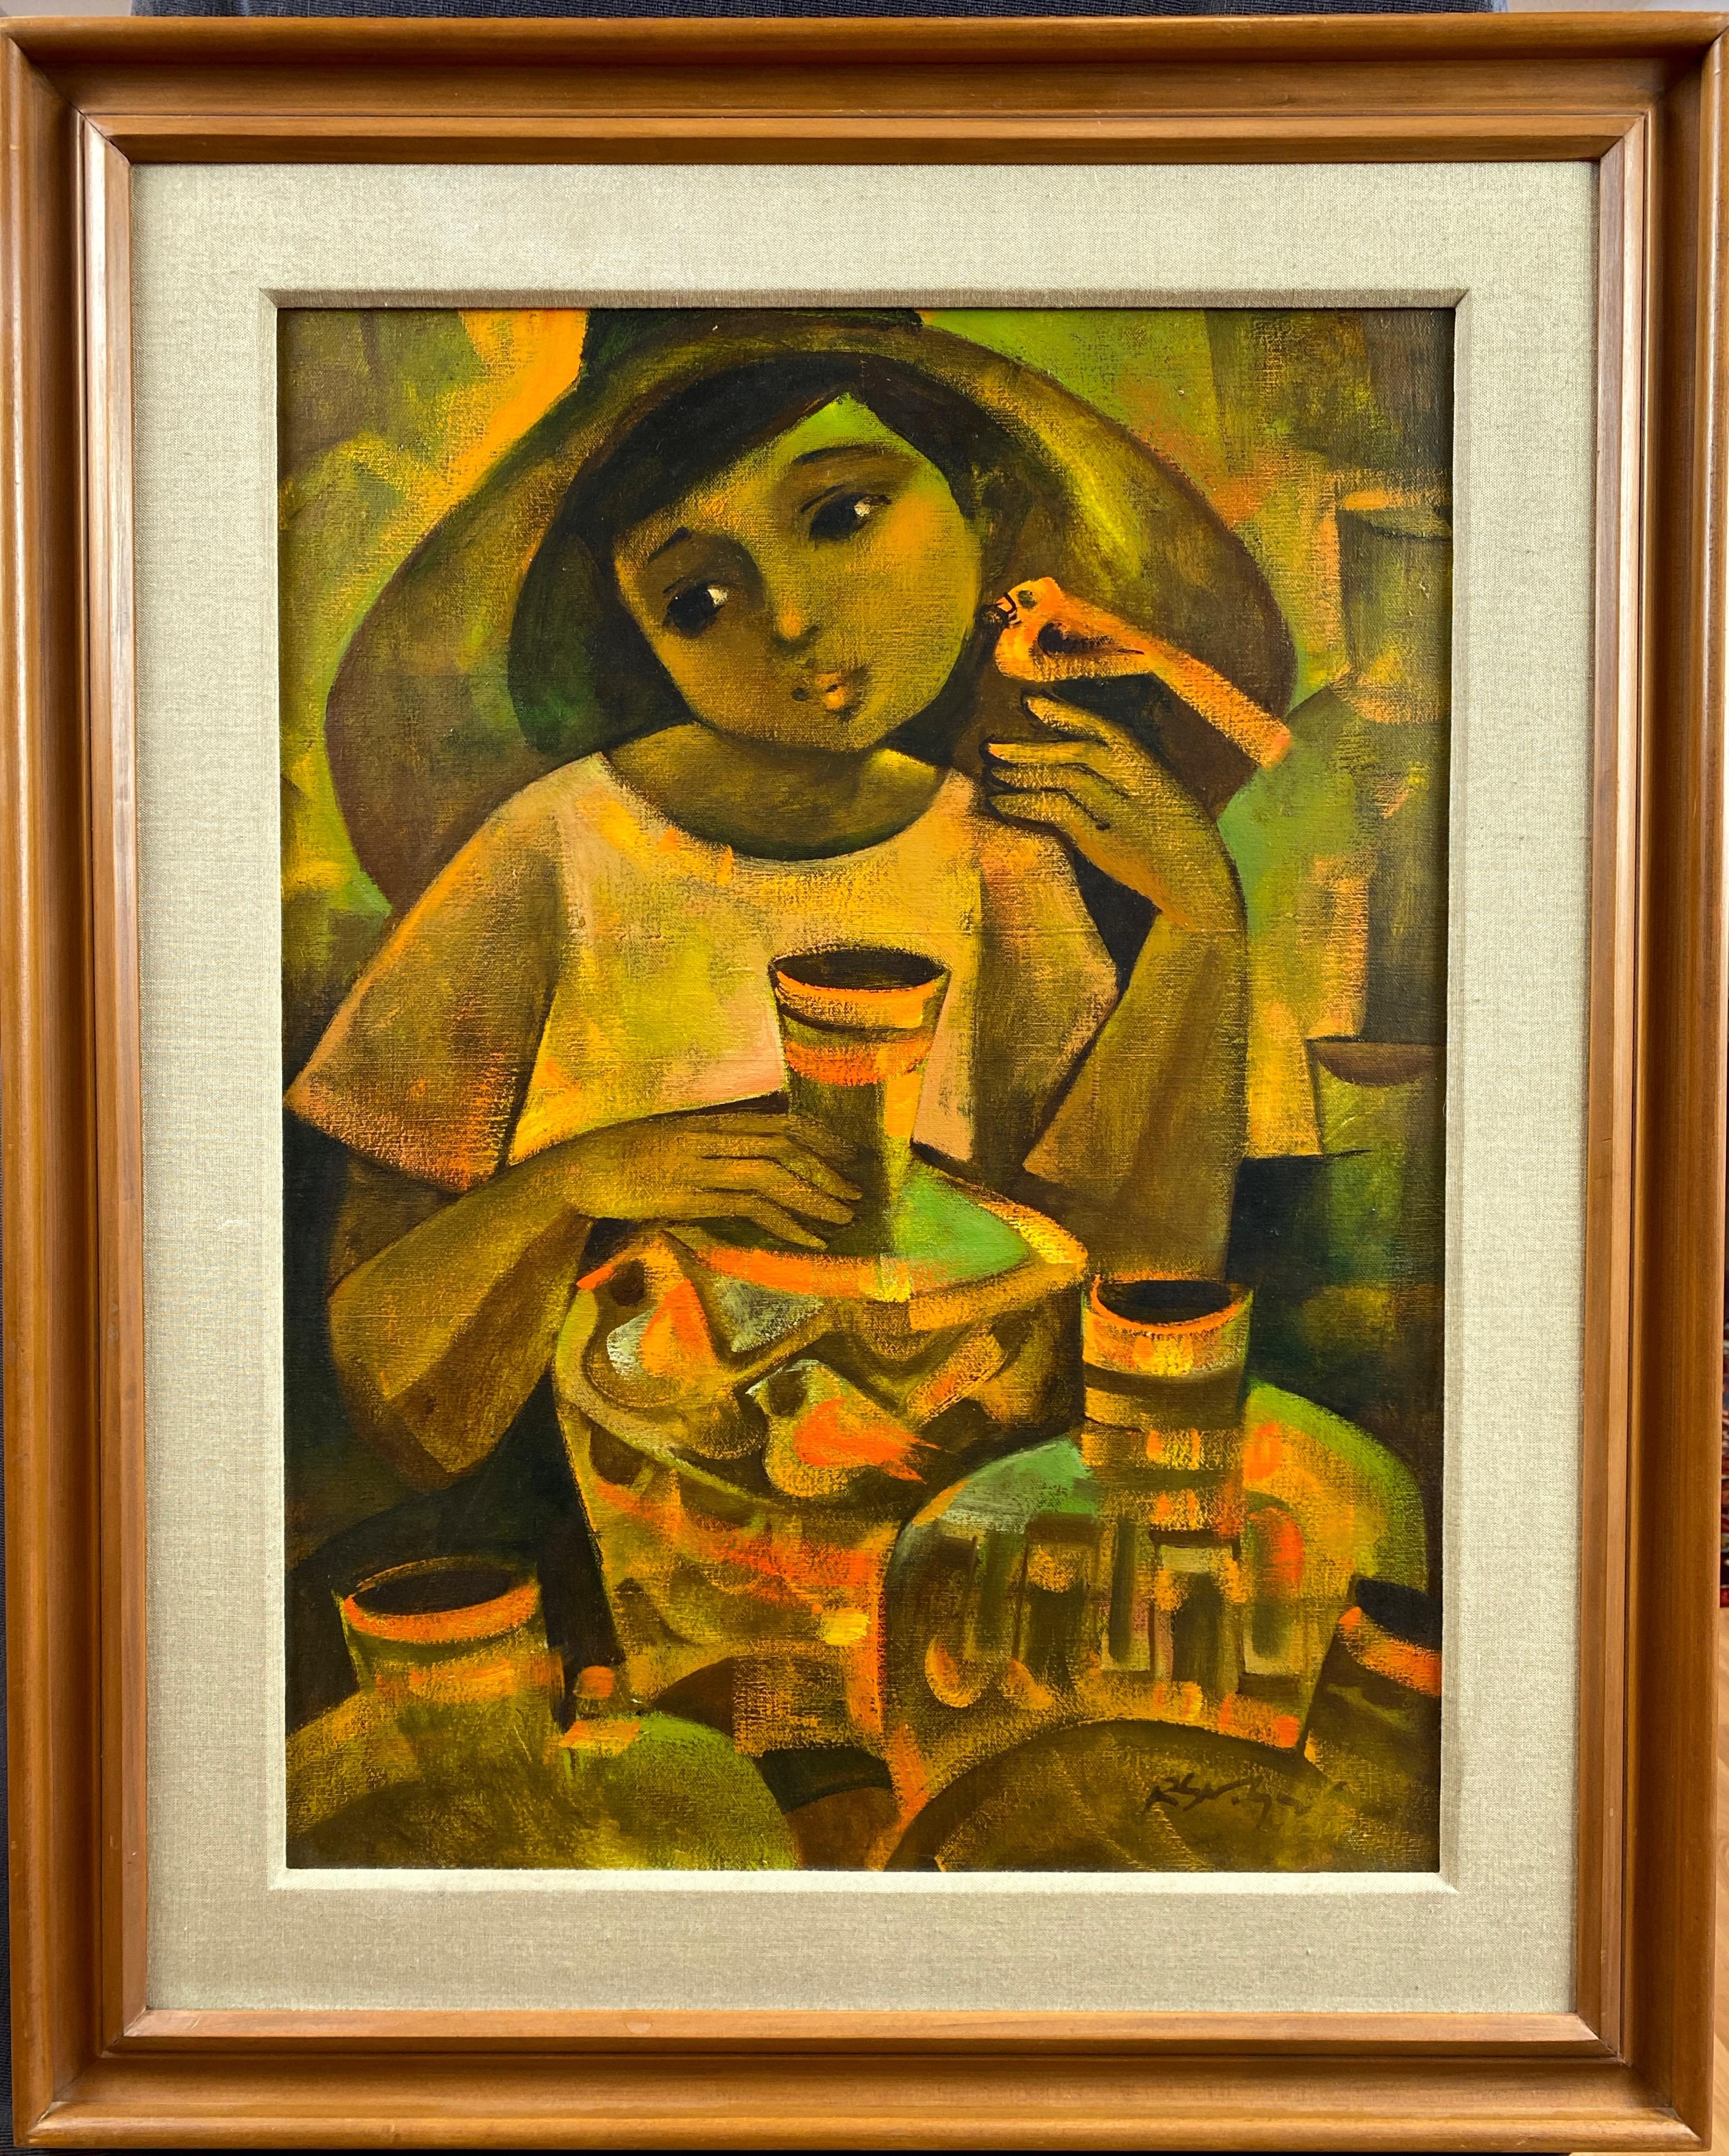 A large late 1960s untitled post-impressionist oil painting on canvas of a young pottery vendor by important mid-century Filipino artist Roger San Miguel (b. 1940).

Young girl or boy in oversized hat sits behind a number of large pieces of